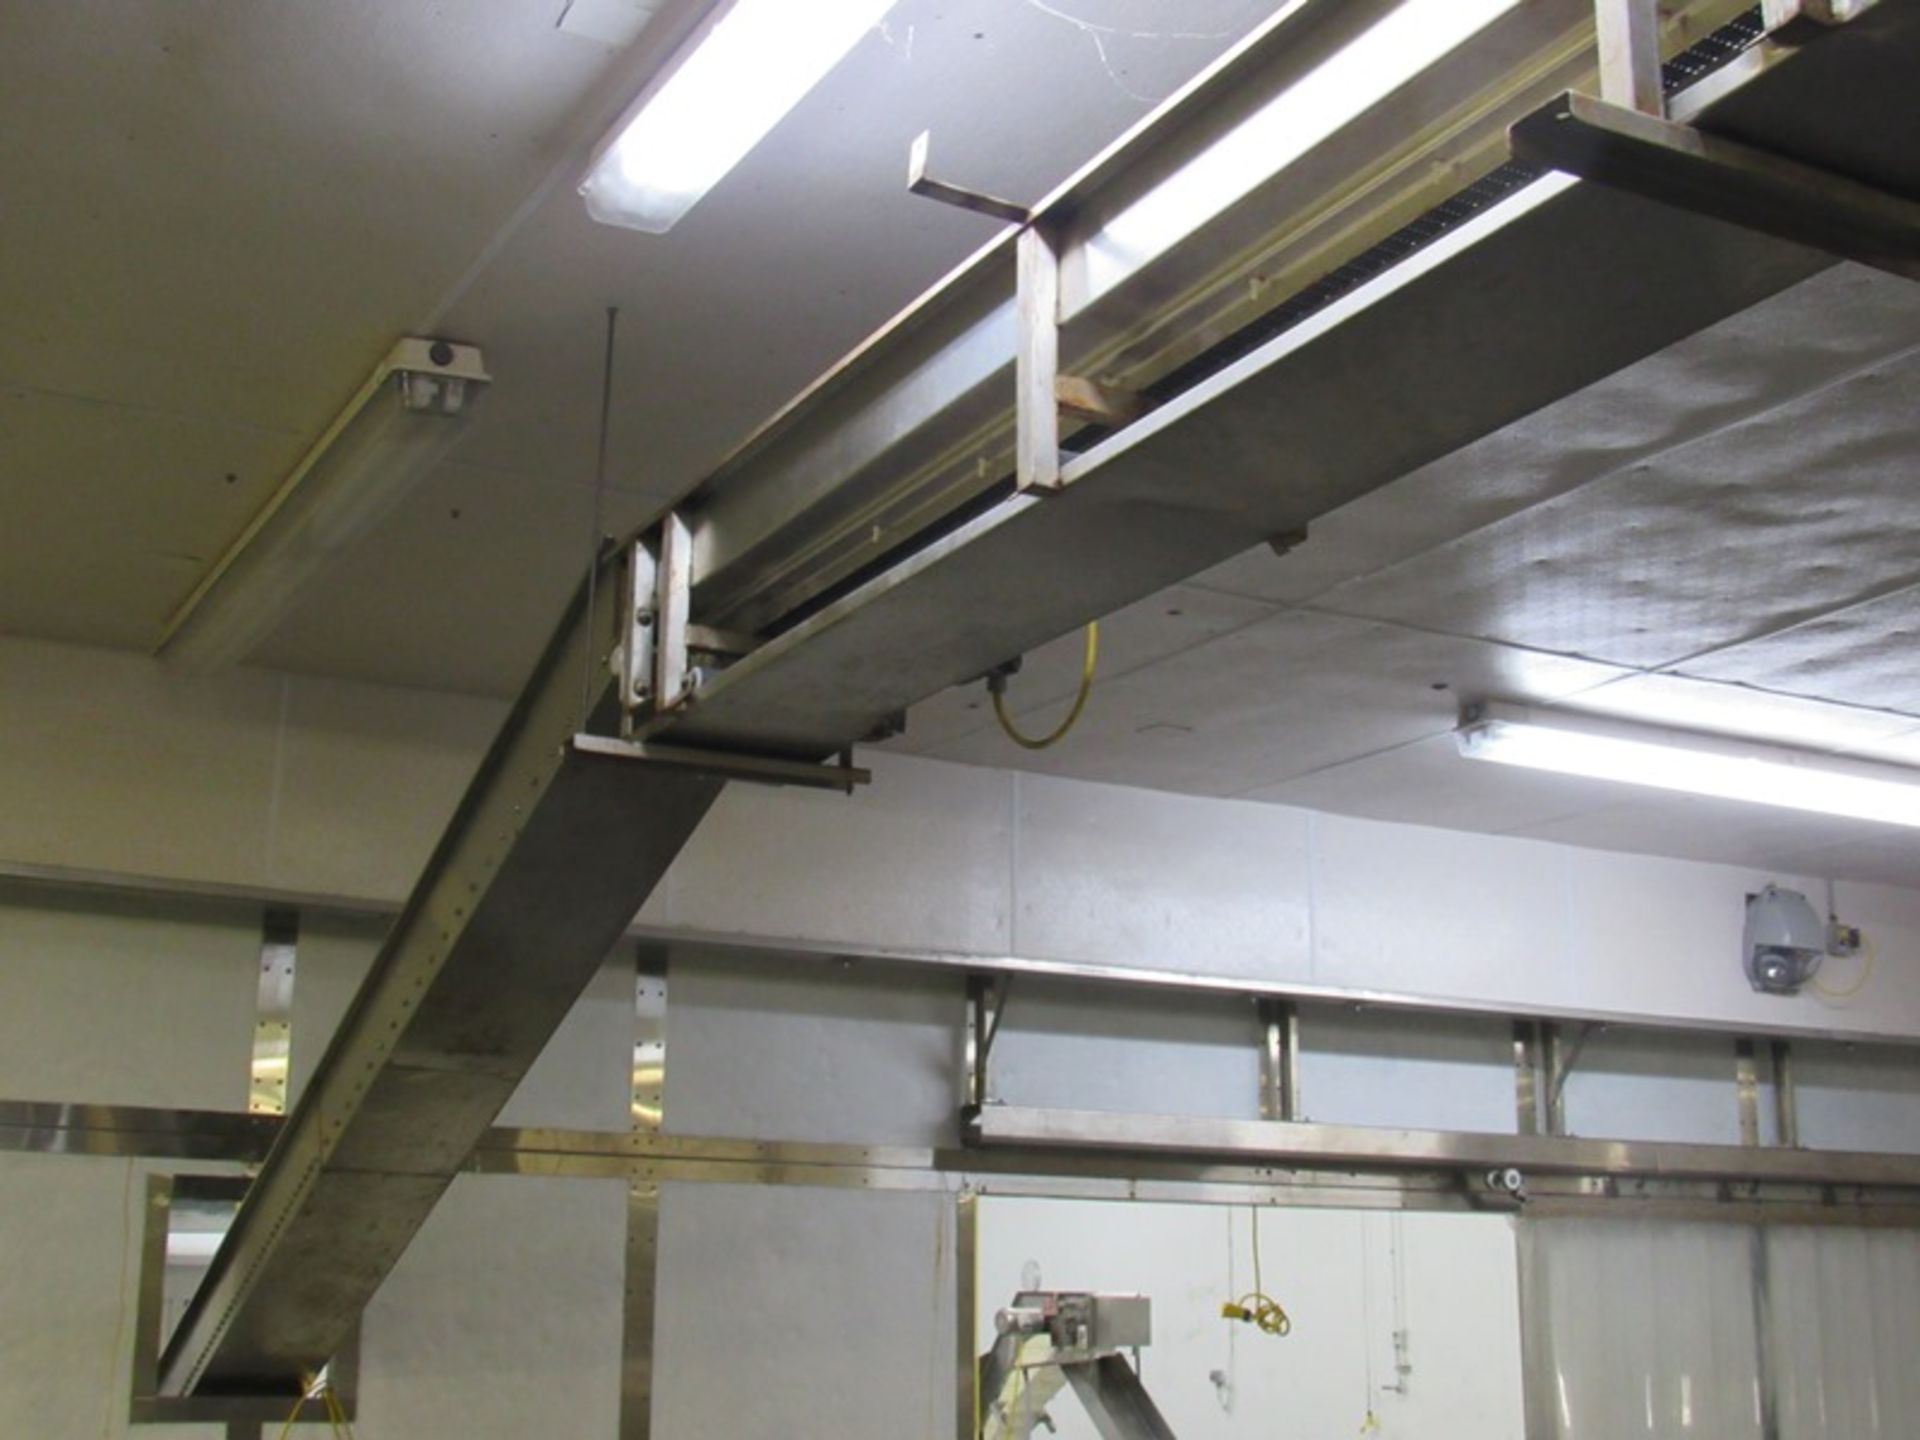 Stainless Steel Ceiling Suspend Conveyor, 12" W X 90' L, 1 h.p. motor, incline/decline (Required - Image 6 of 10